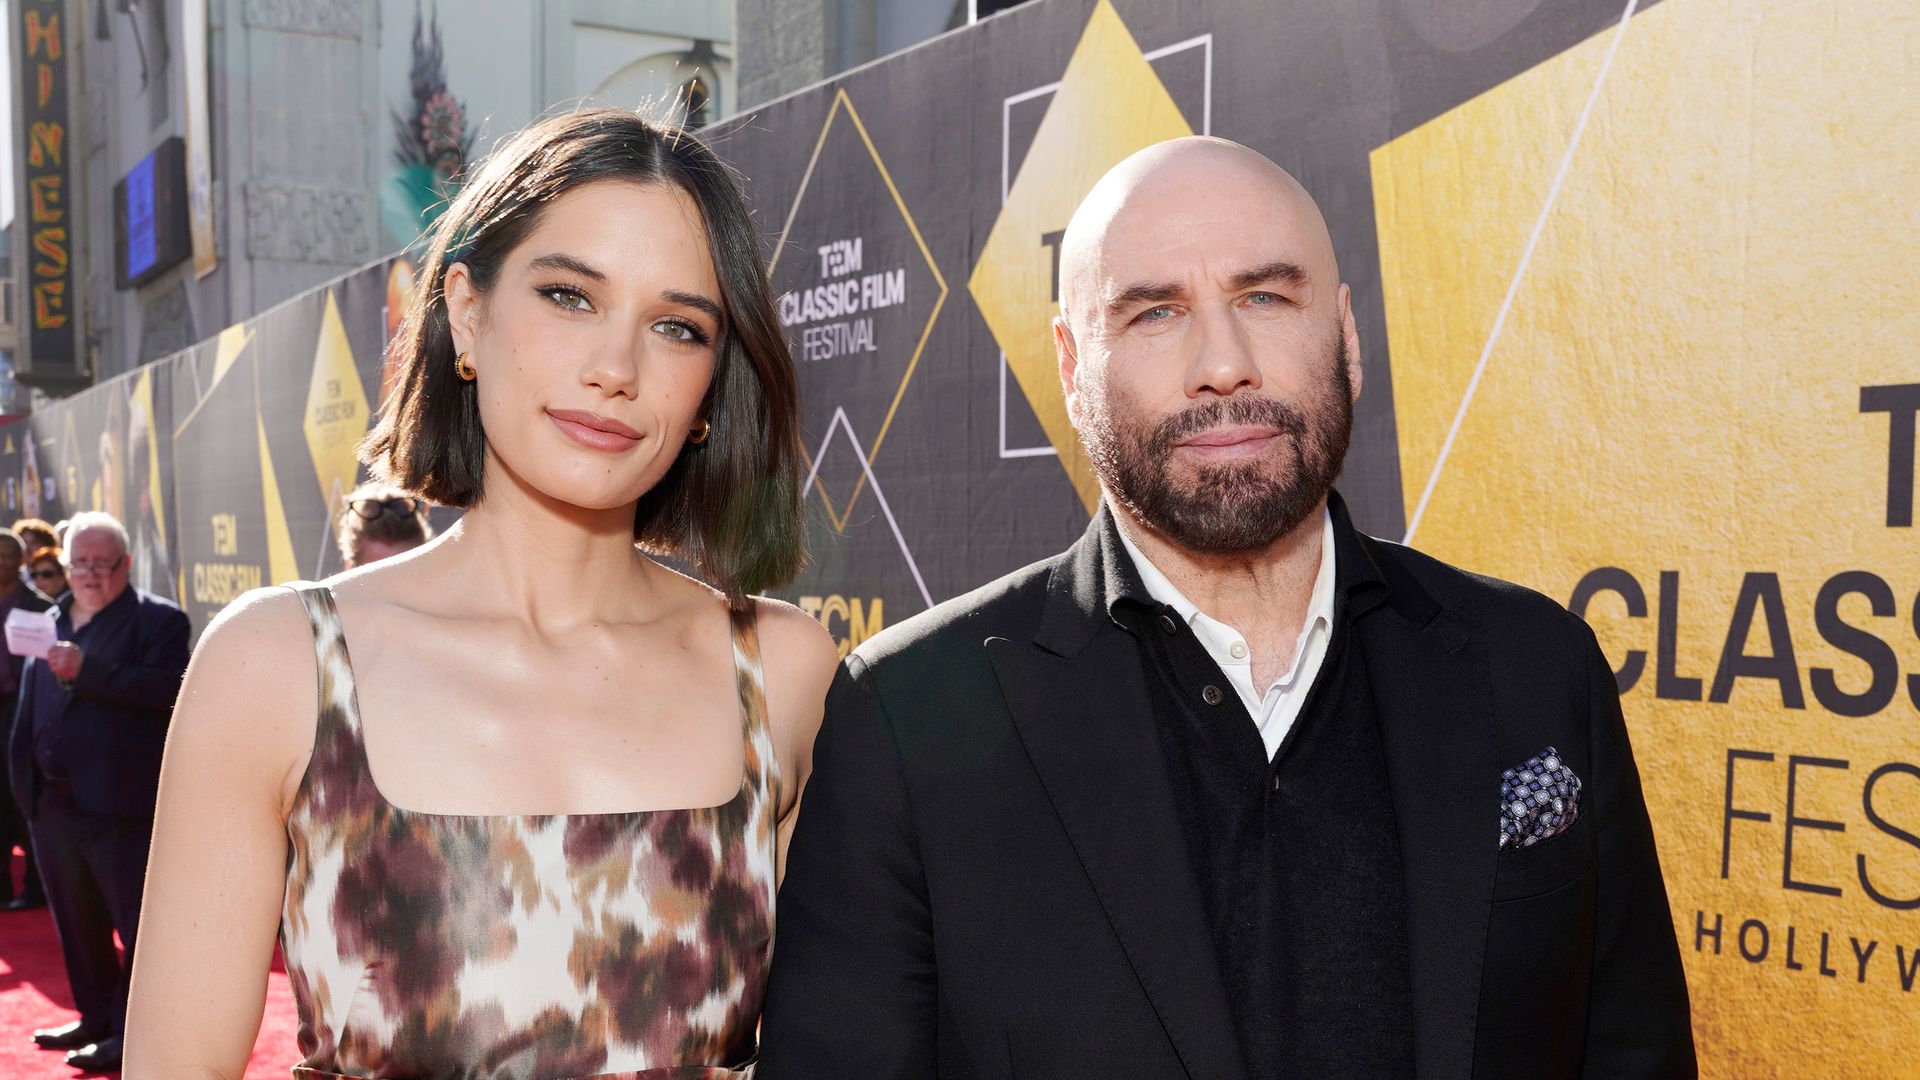 John Travolta displays youthful appearance alongside gorgeous daughter Ella for rare red carpet outing